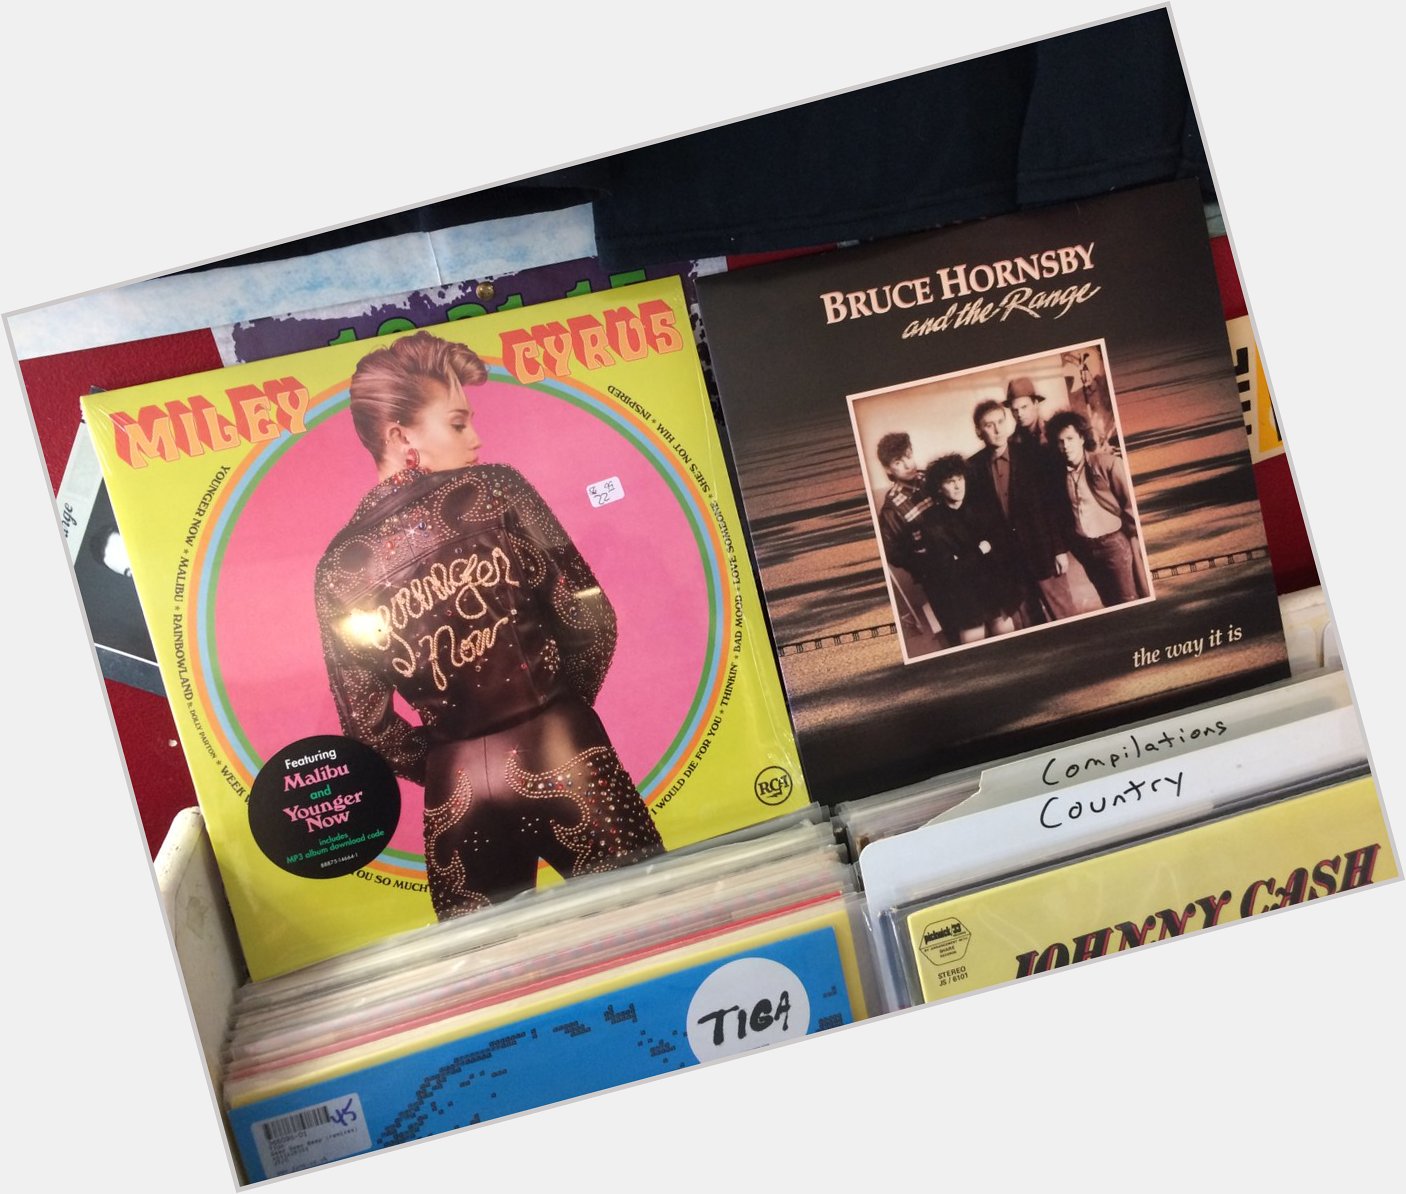 Happy Birthday to Miley Cyrus & Bruce Hornsby 